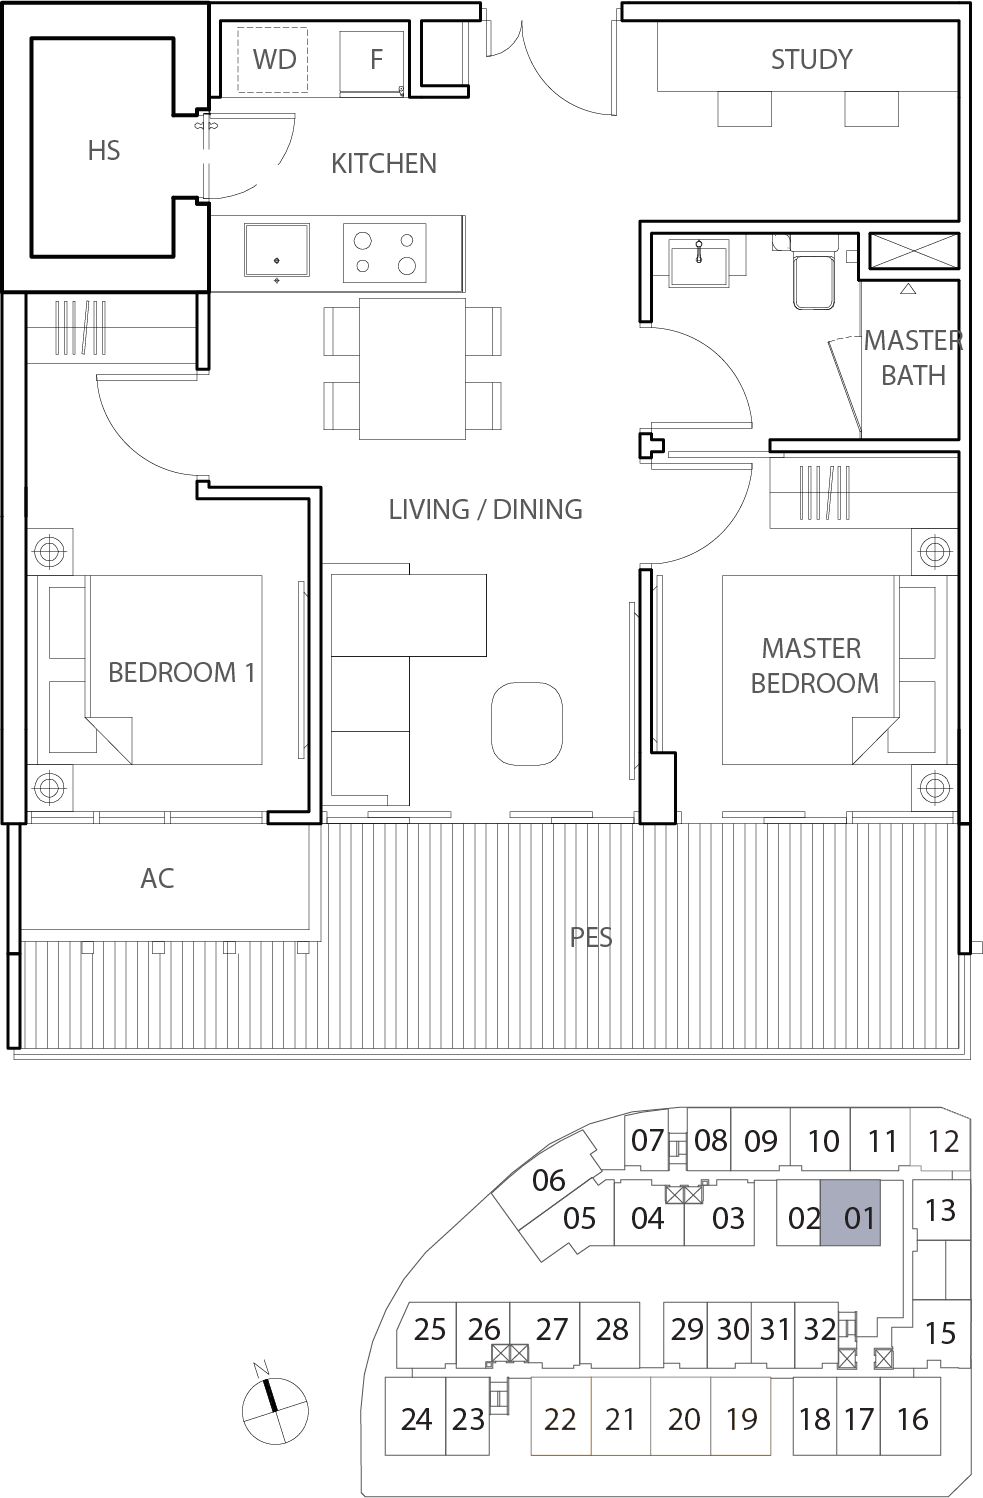 Floor Plan for Residential Type eB5-a1